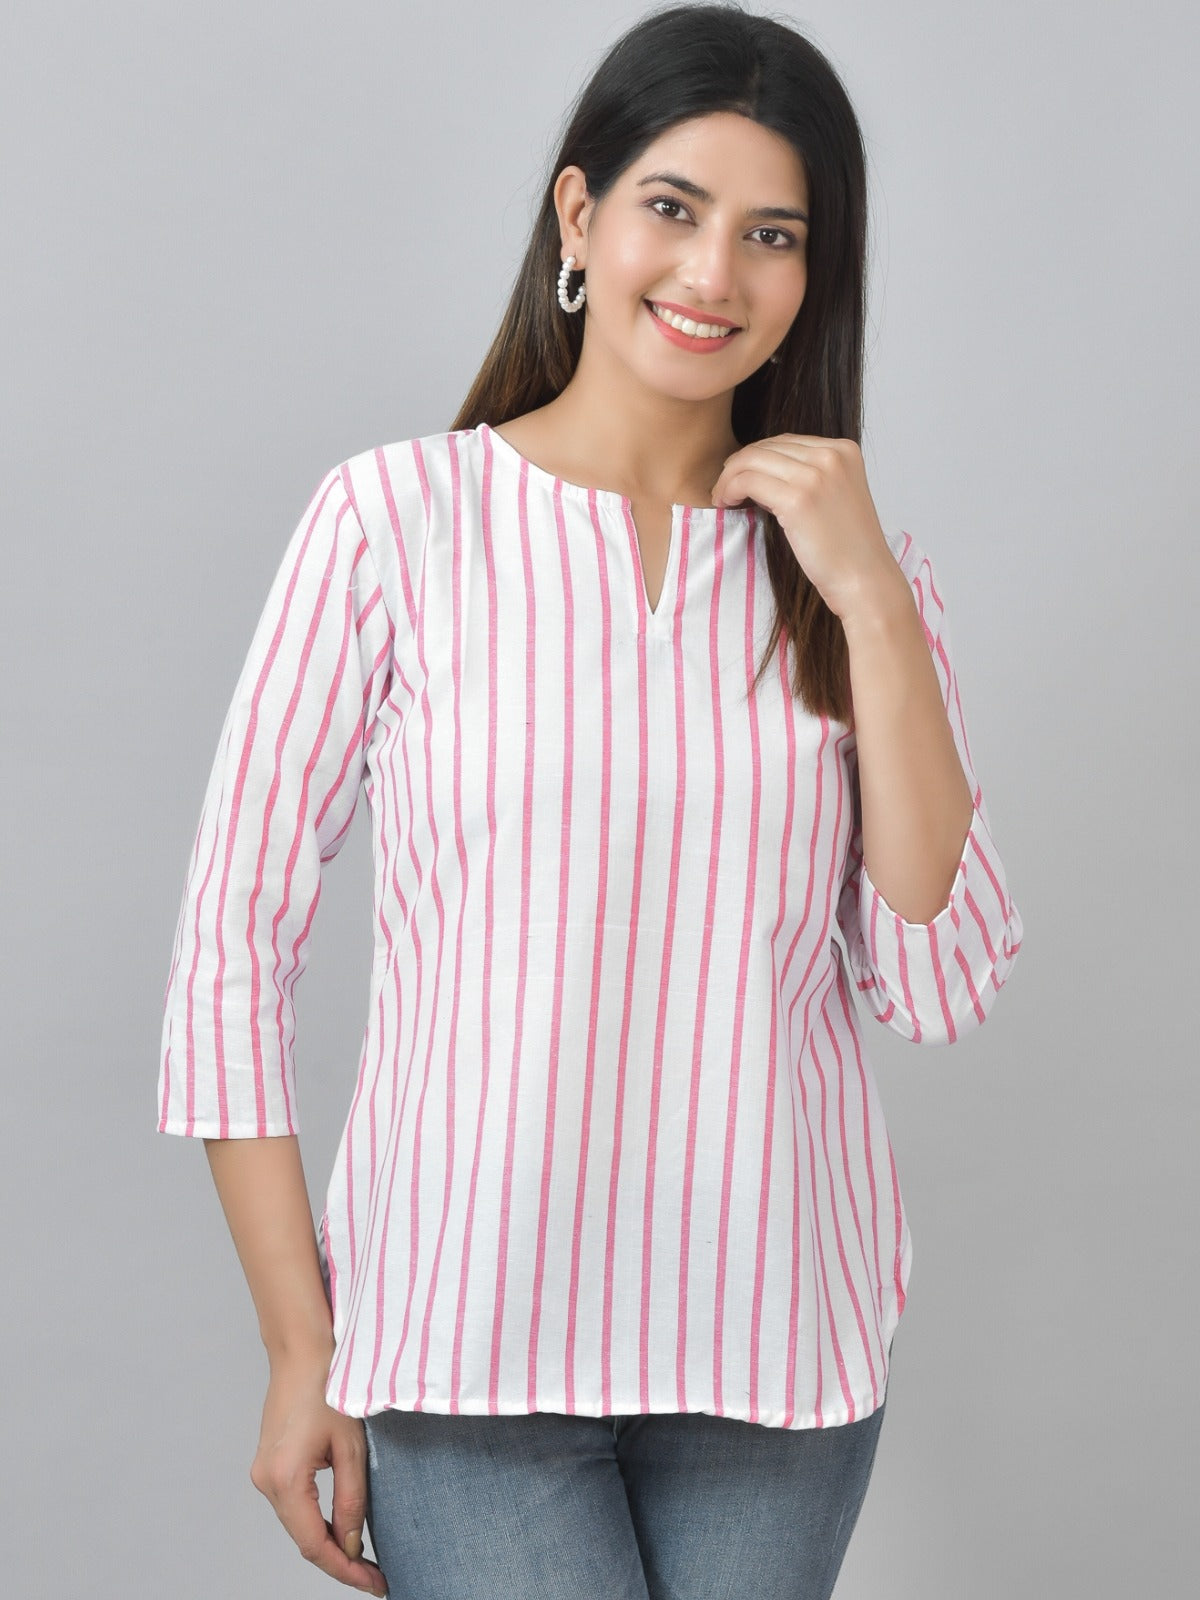 Pack Of 2 Black And Pink Striped Cotton Womens Top Combo